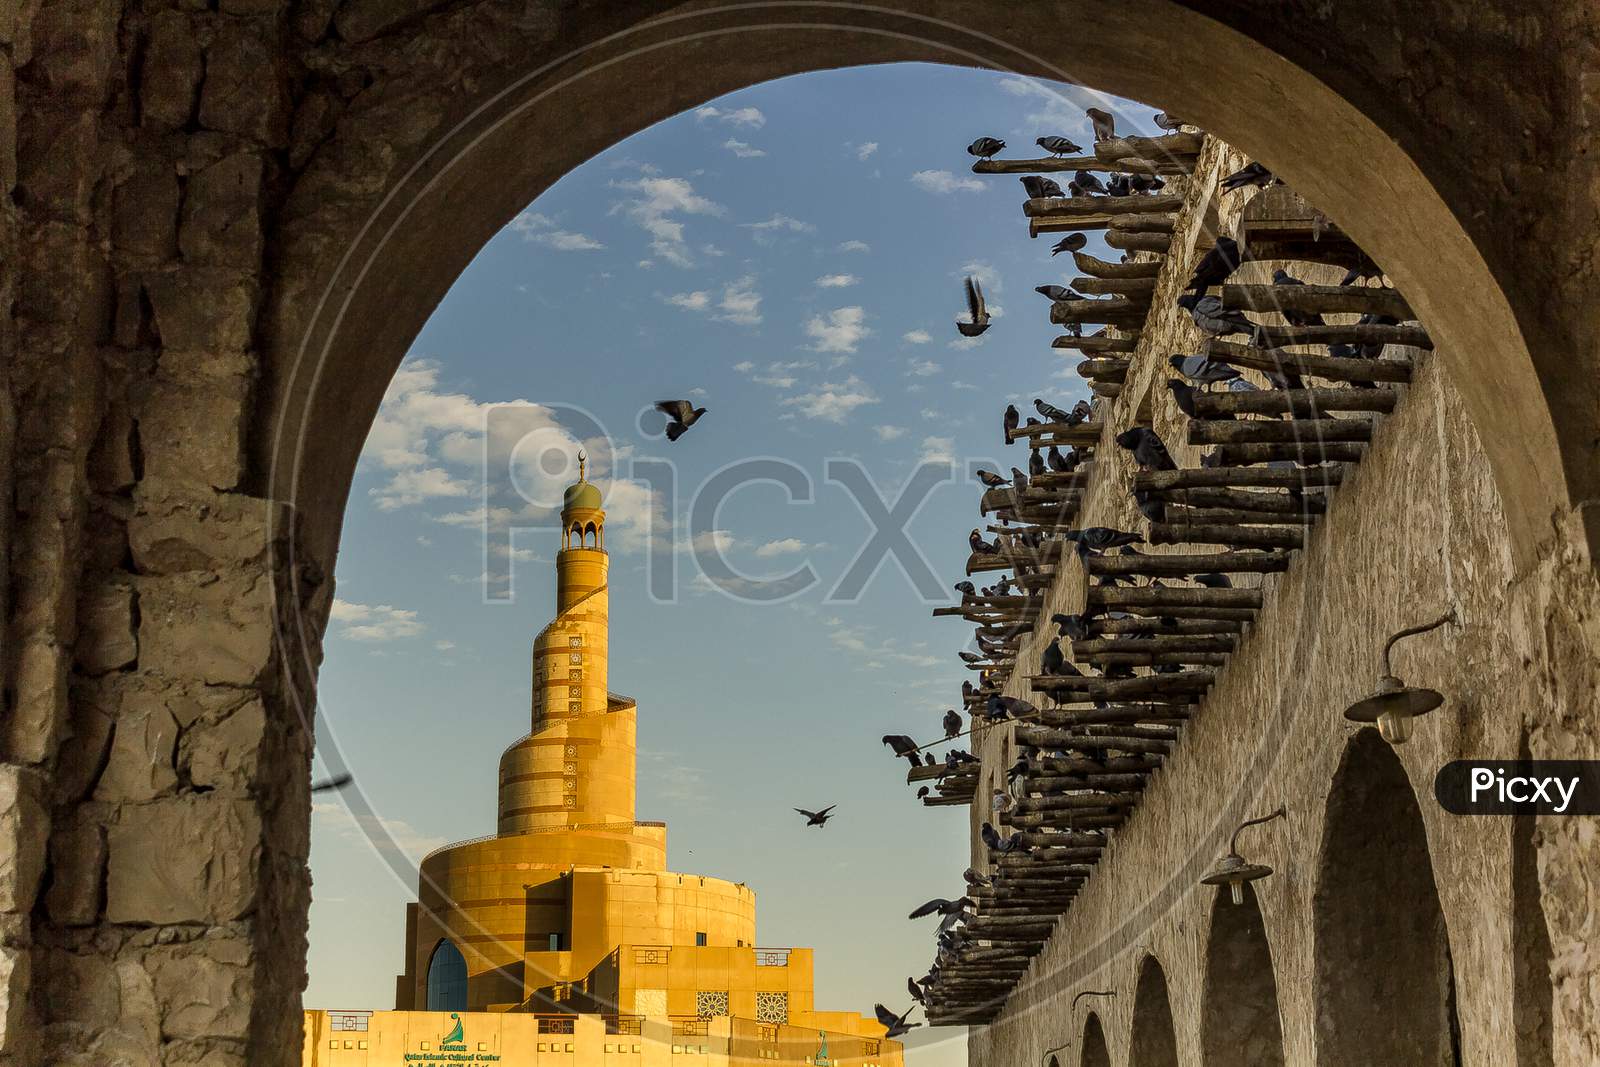 Al-Fanar Qatar Islamic Cultural Center daylight exterior view with pigeons flying in the sky in foreground and clouds in sky in background